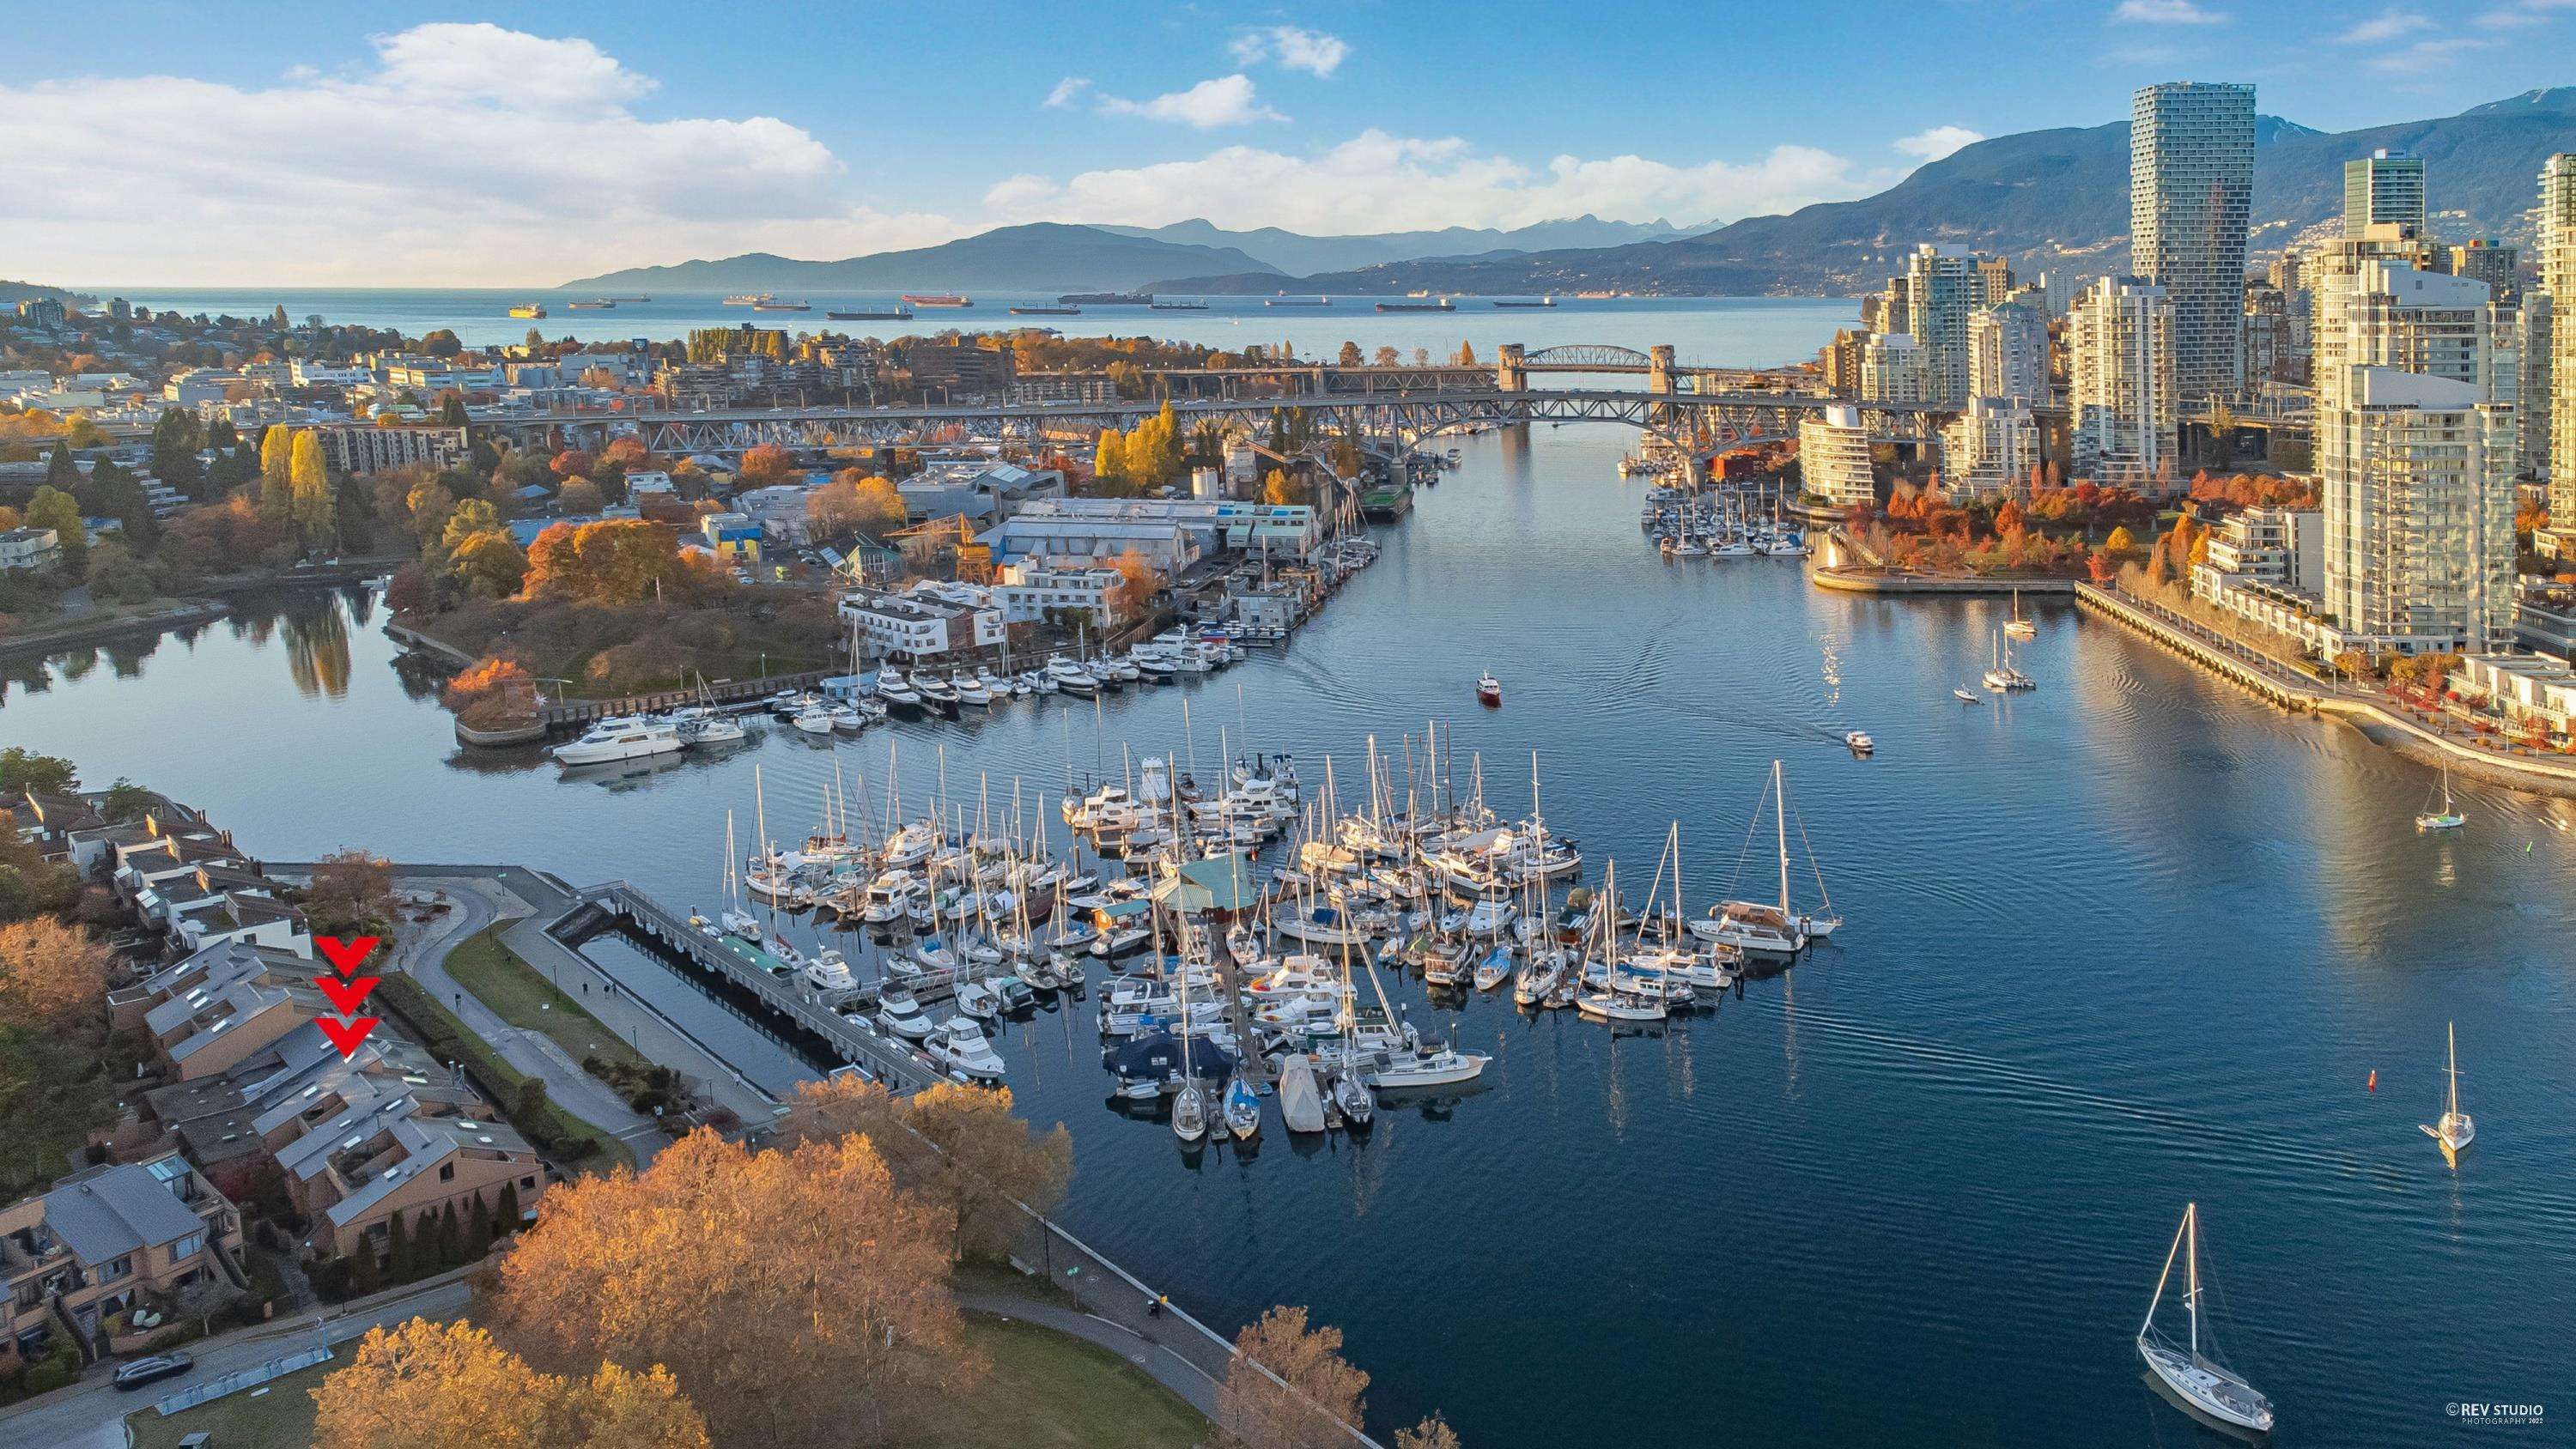 Open House. Open House on Sunday, January 22, 2023 2:00PM - 4:00PM
WATERFRONT TOWNHOUSE w/ stunning water, marina, cityscape and mtn views. 180 degree views W out to English Bay sunsets and E to the Cambie St. Bridge sunrises. Renovation by Colbrone Archi